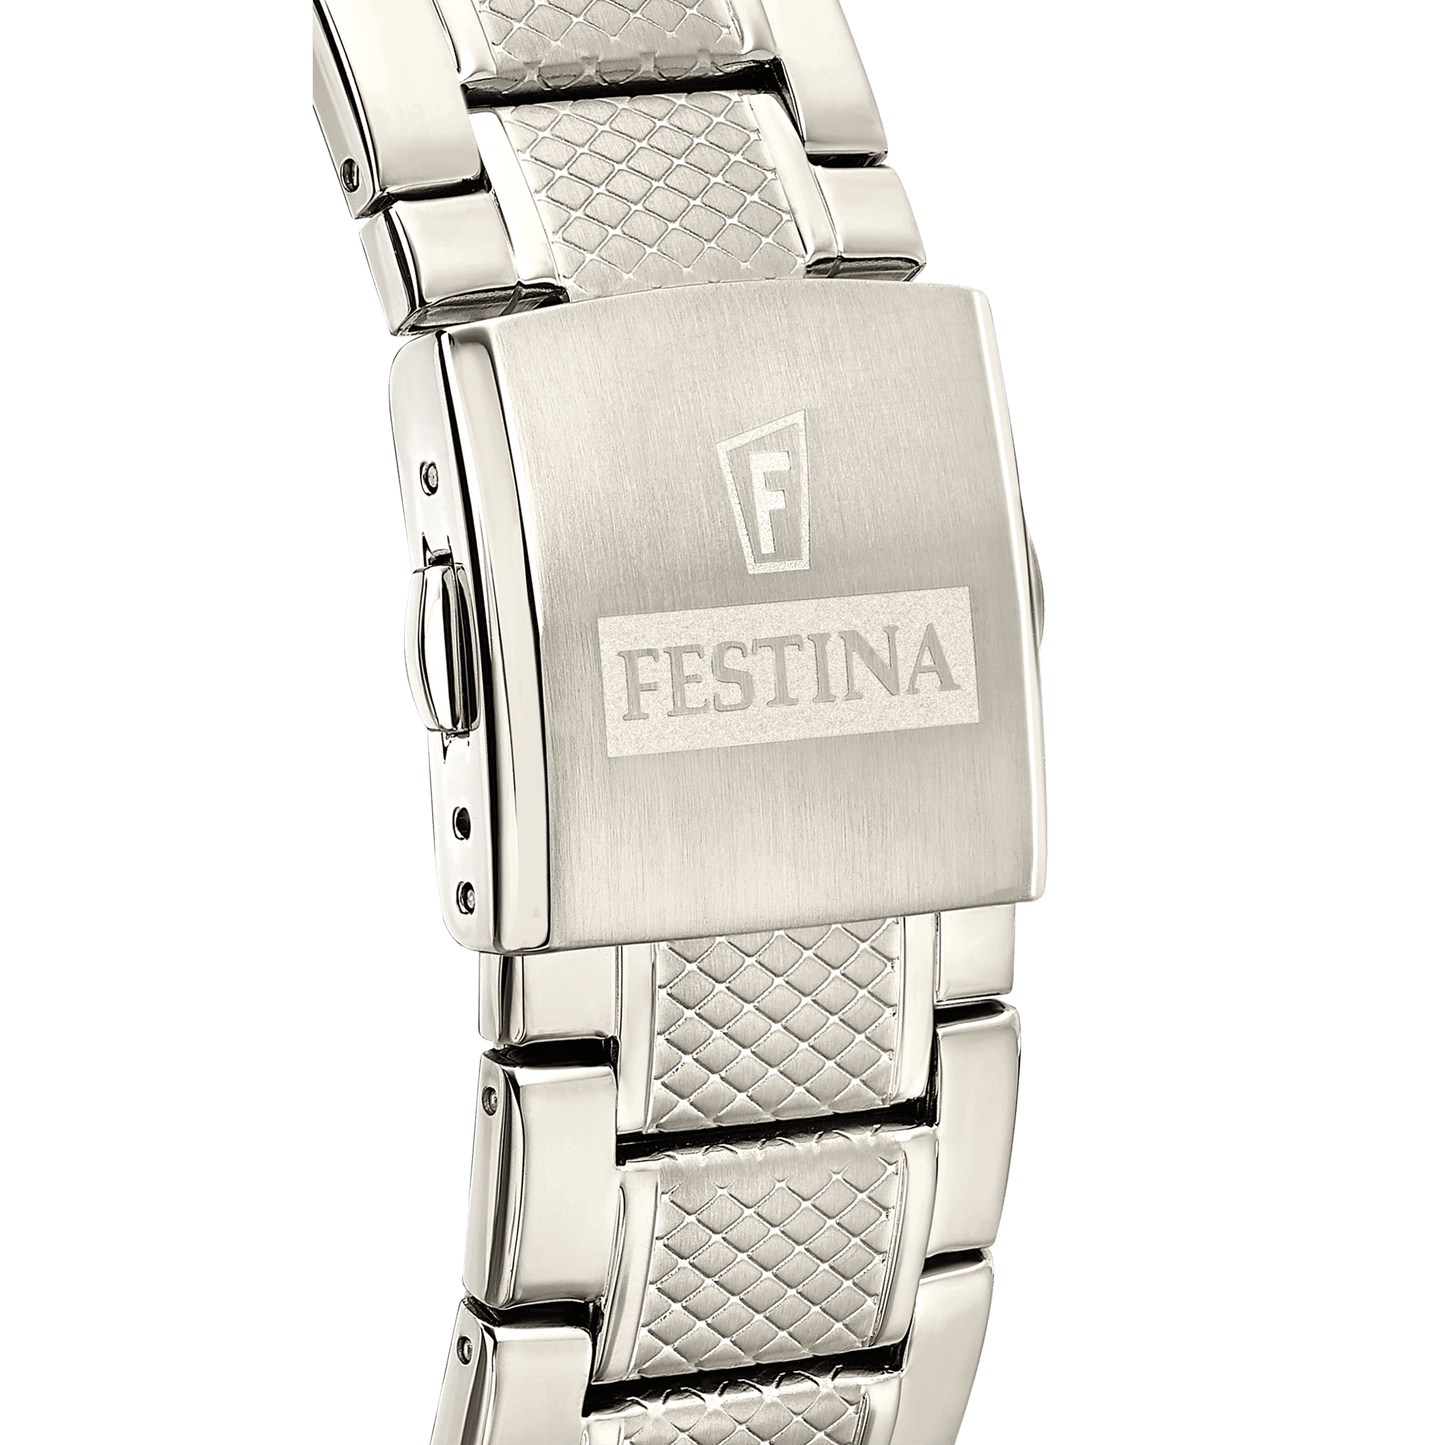 Chrono Sport F20439-4 | Water Resistance 100m/330ft - Strap Material Stainless Steel - Size 45 mm / Free shipping, 2 years warranty & 30 Days Return | Festina Watches USA